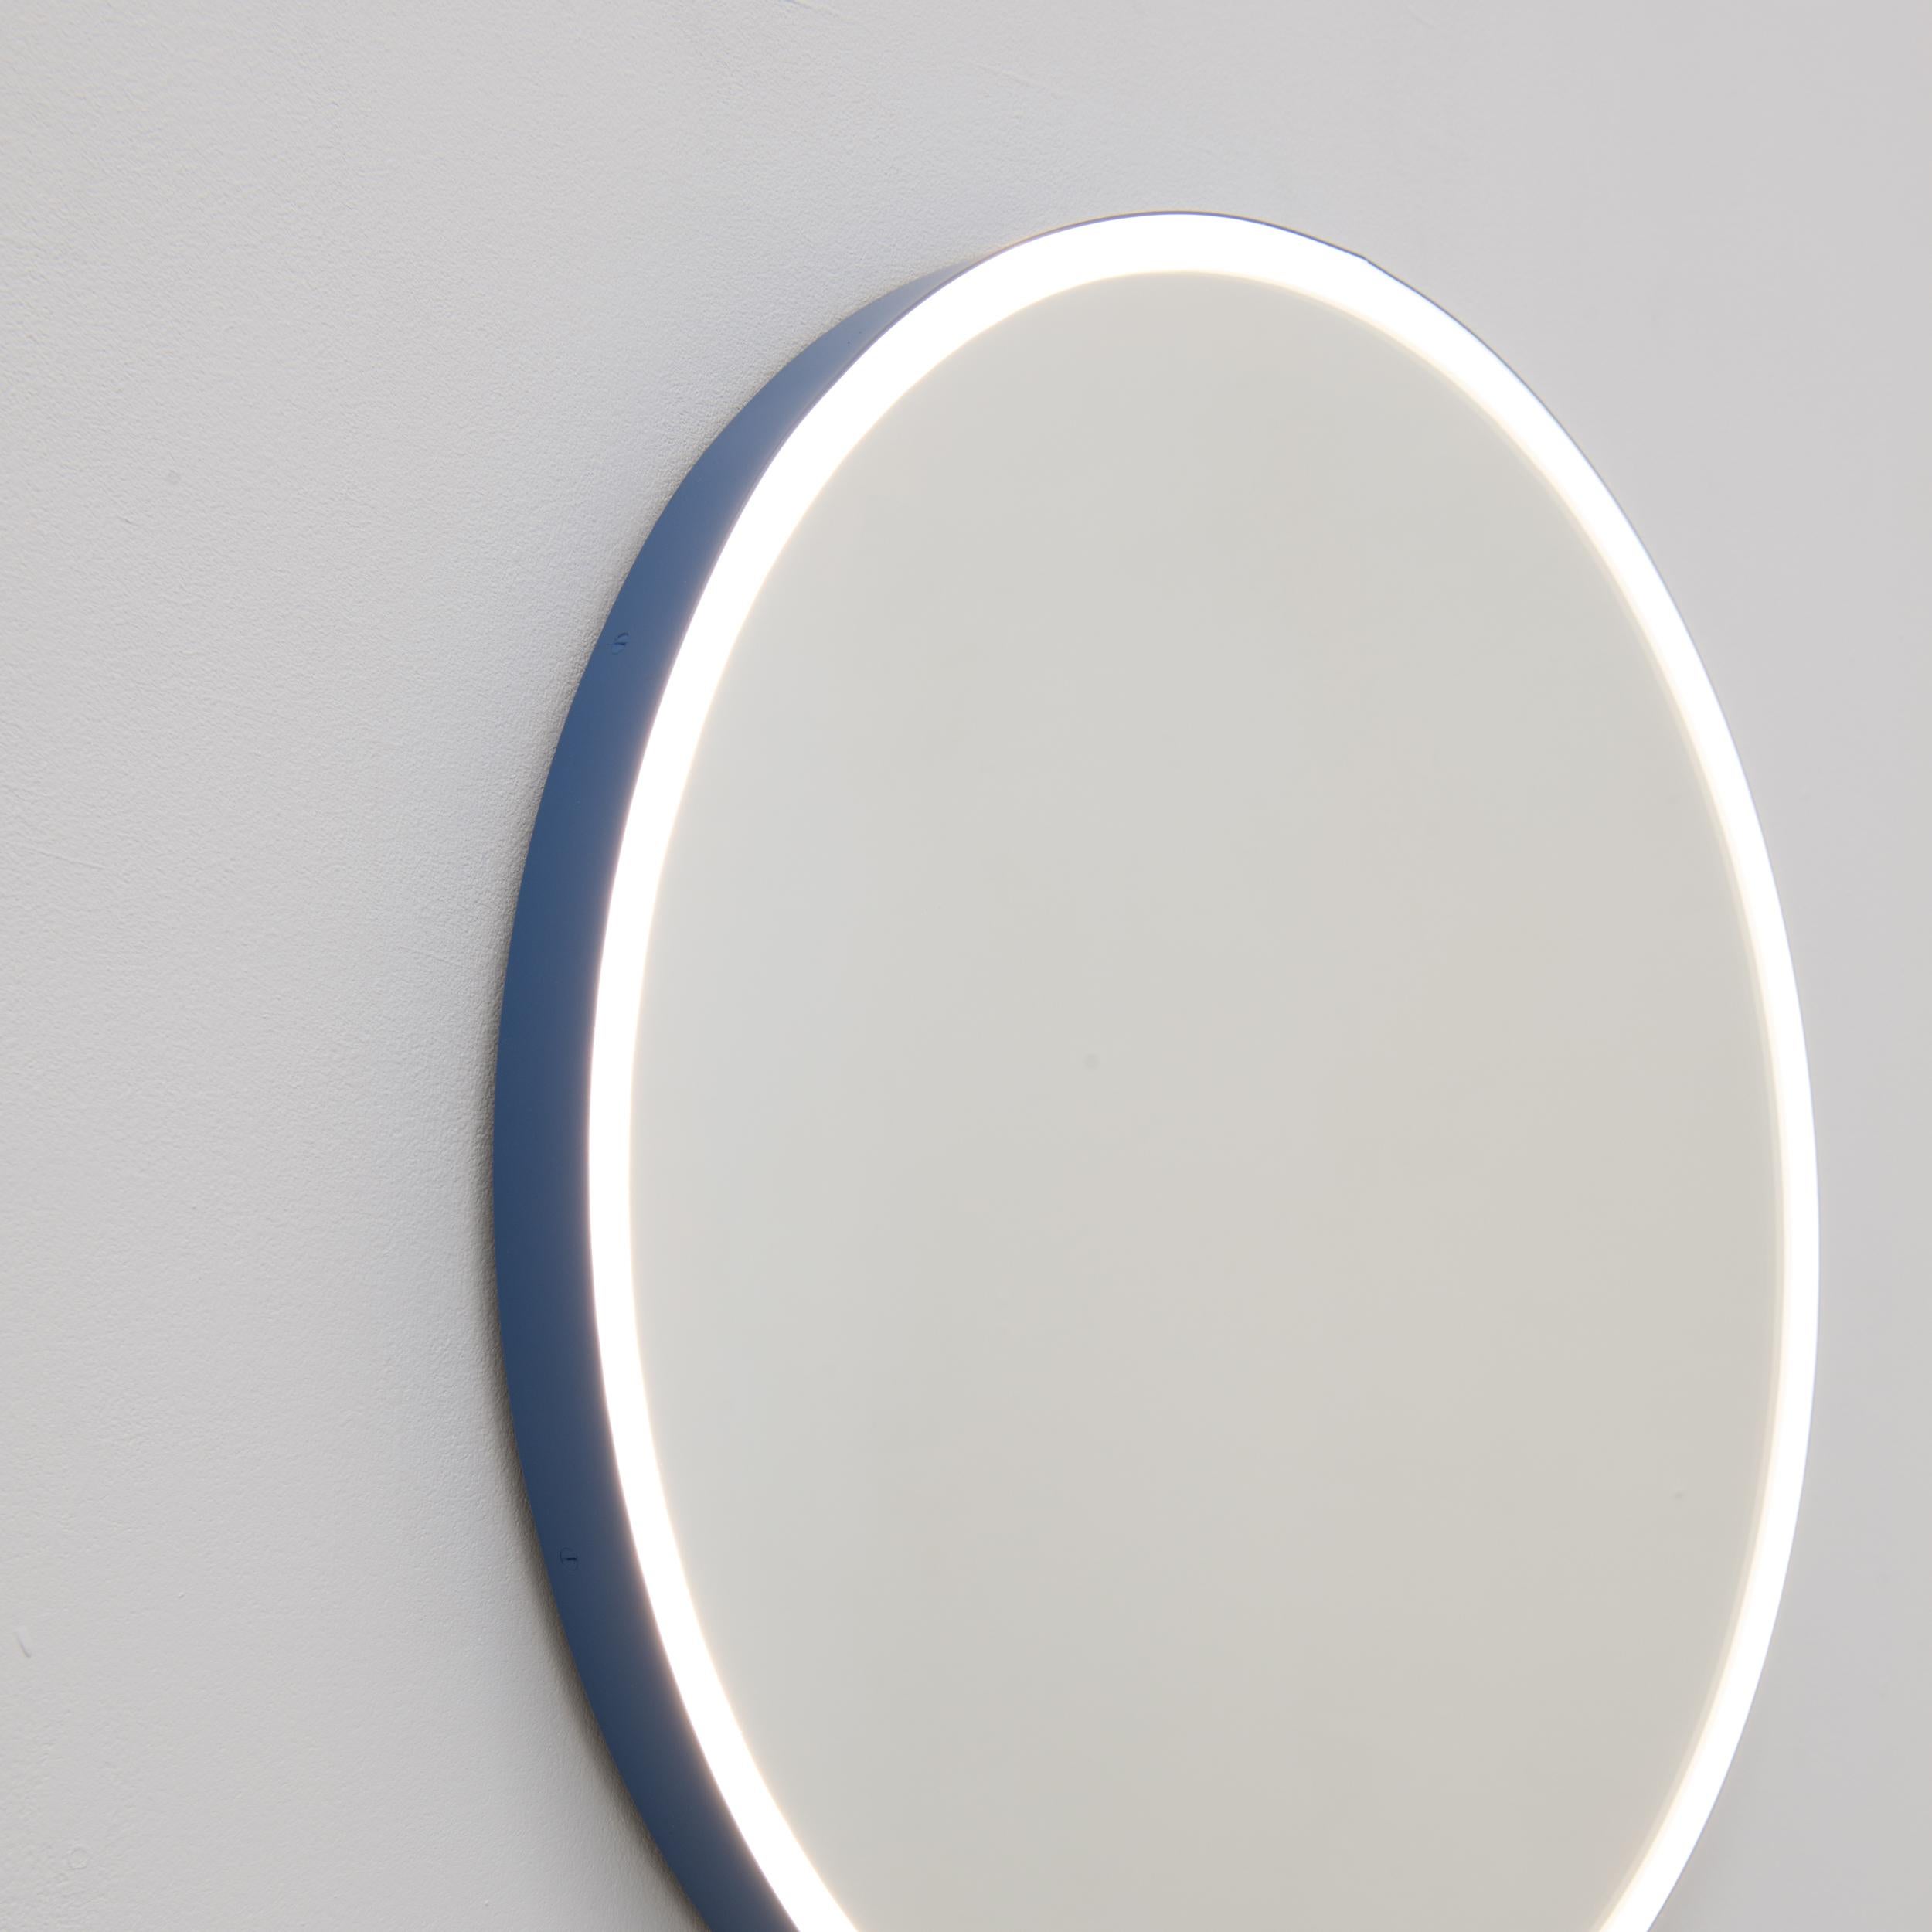 British Orbis Front Illuminated Circular Modern Contemporary Mirror with Blue Frame, XL For Sale